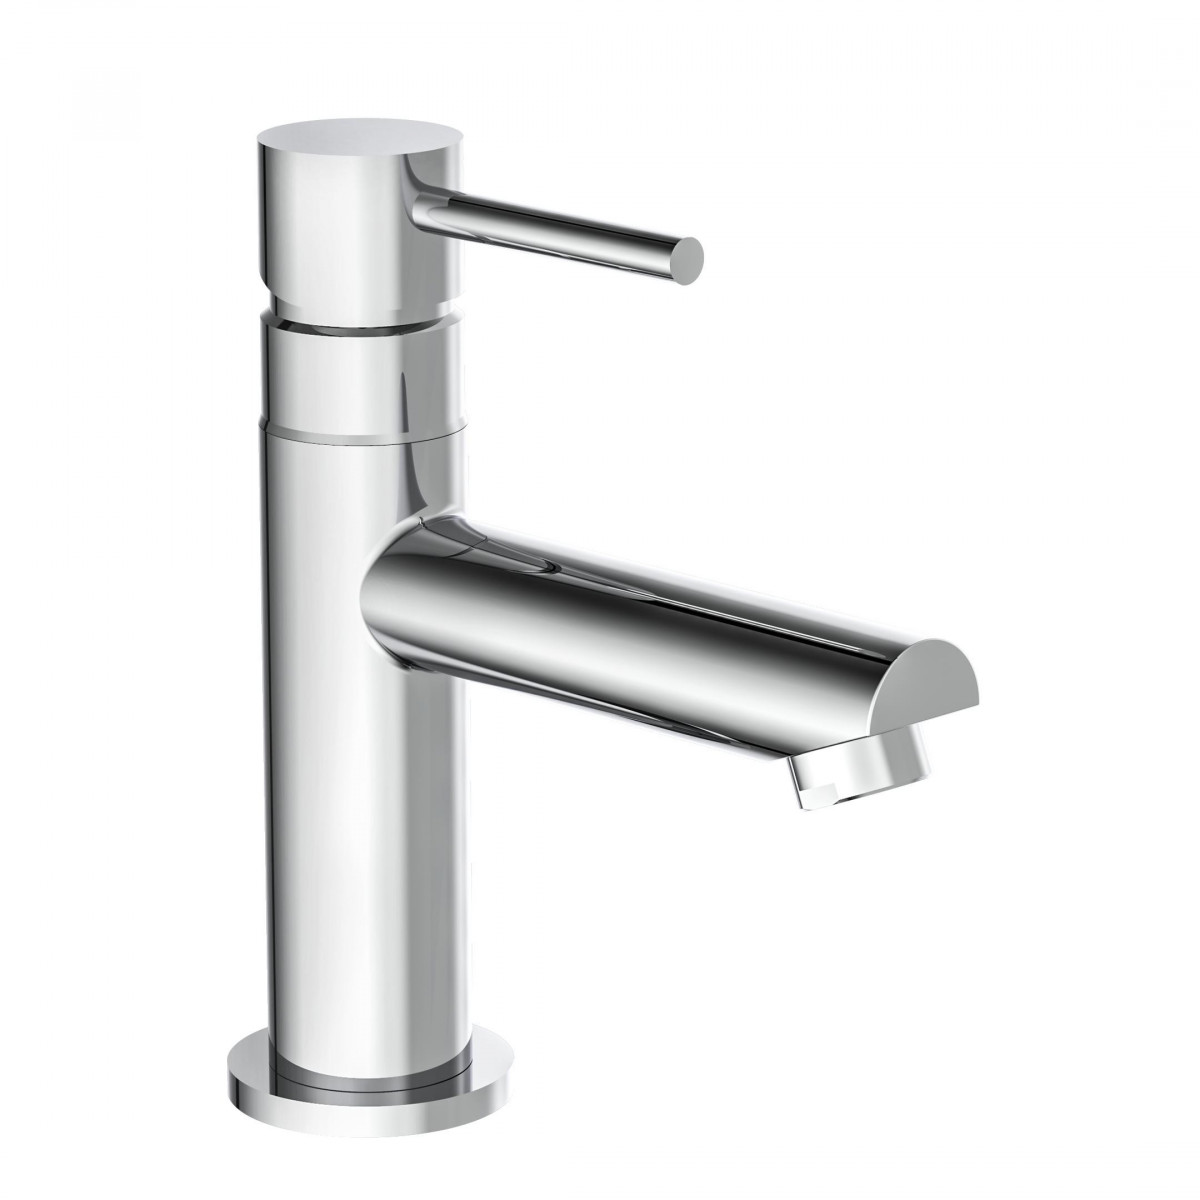 LAURANA Cold water tap, chrome